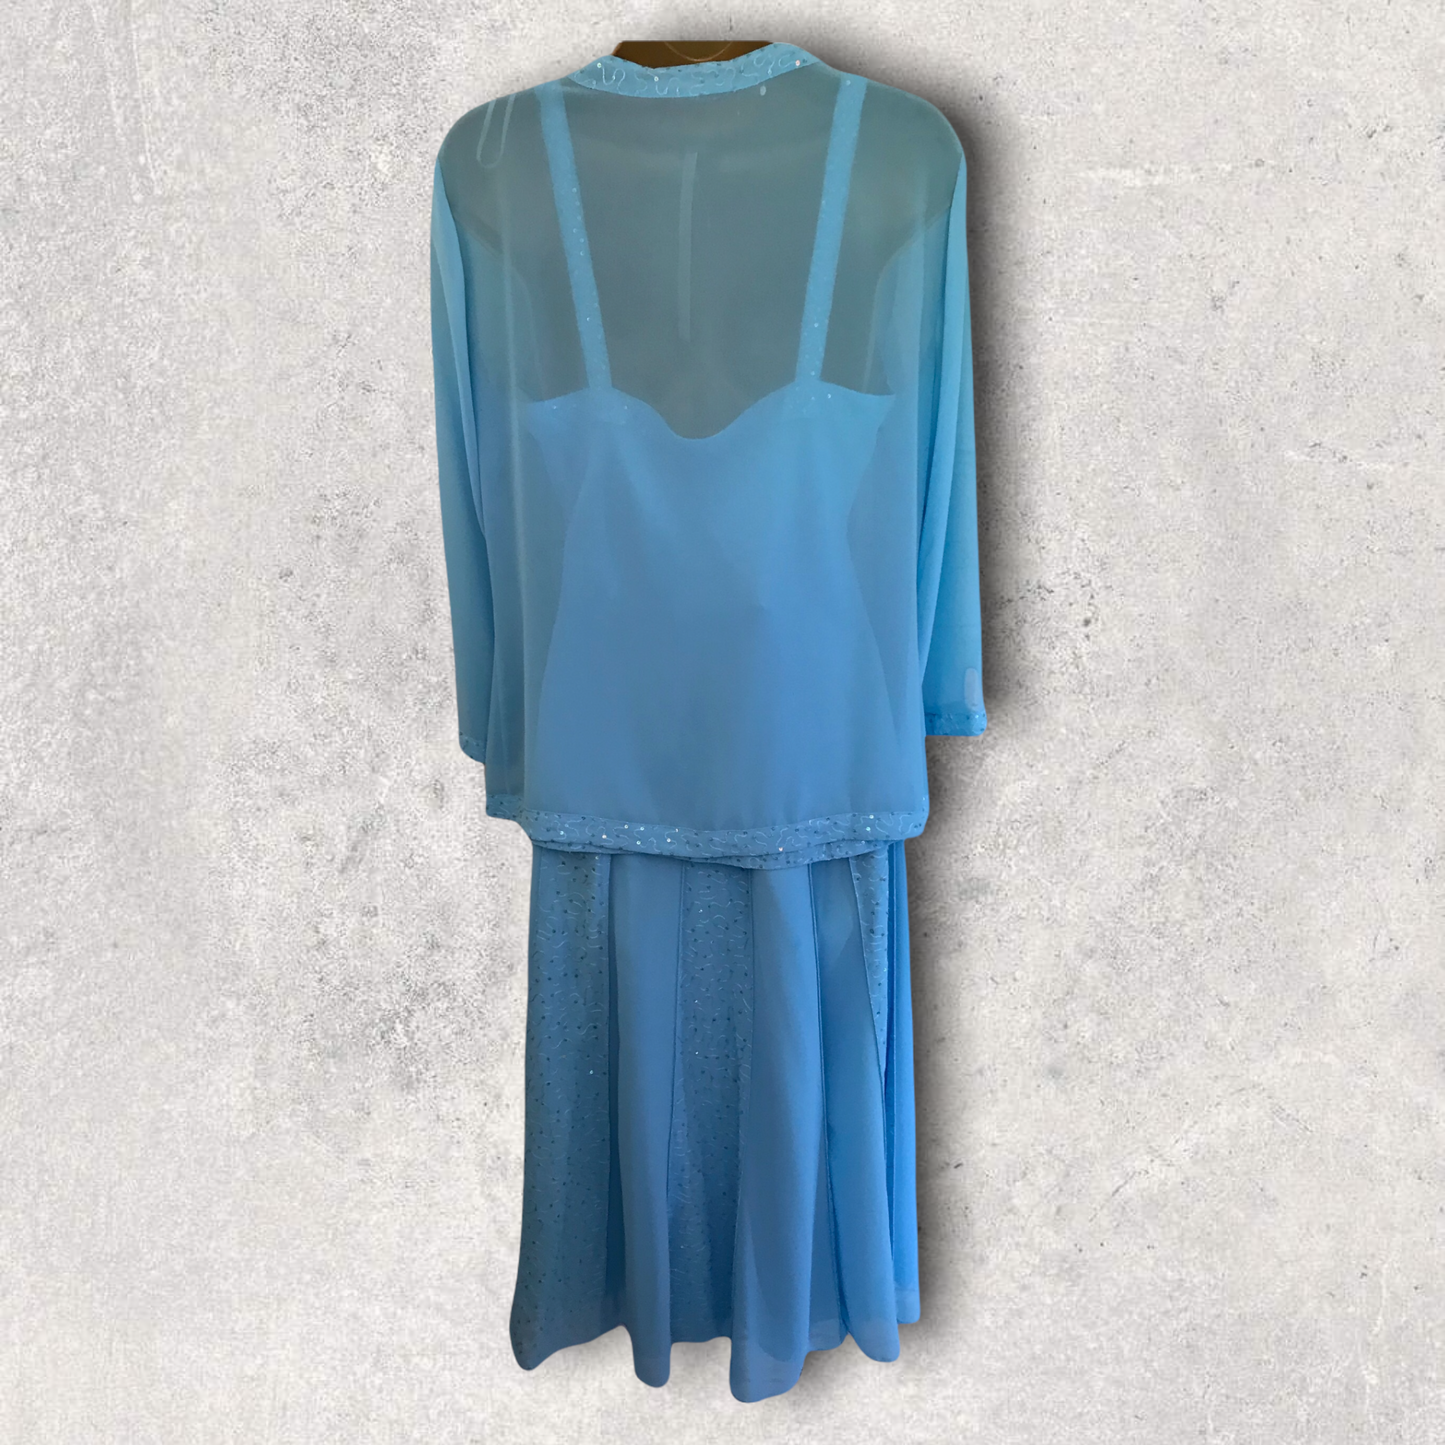 Gina Bacconi Turquoise Chiffon 3 Piece Special Occasion Outfit UK 12 BNWT RRP £250.00 Timeless Fashions